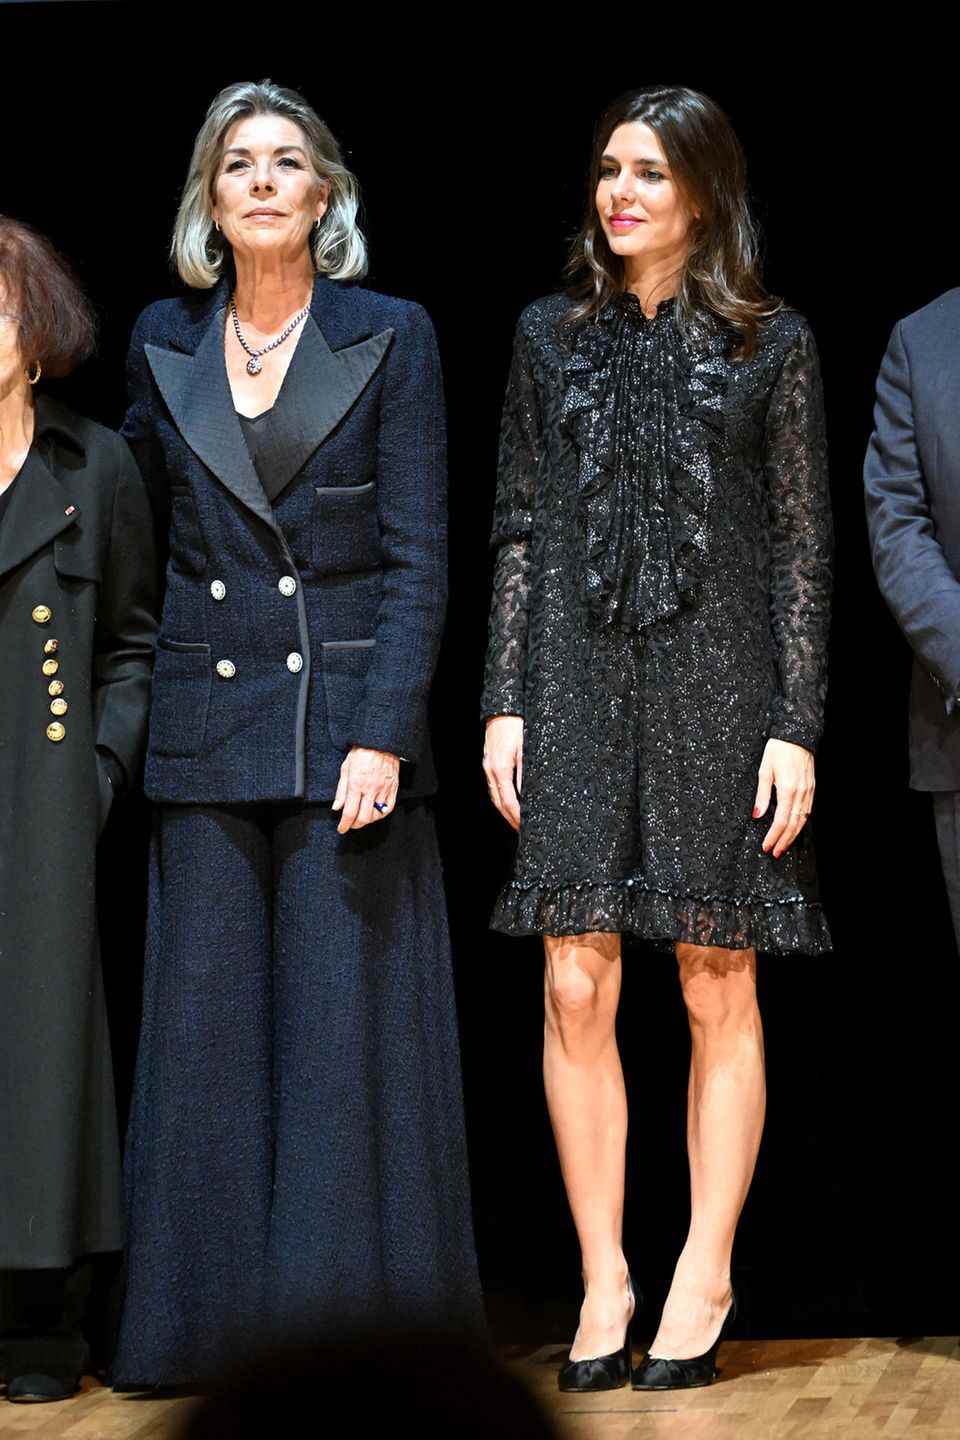 In terms of colour, Caroline von Hannover and Charlotte Casiraghi are an excellent match